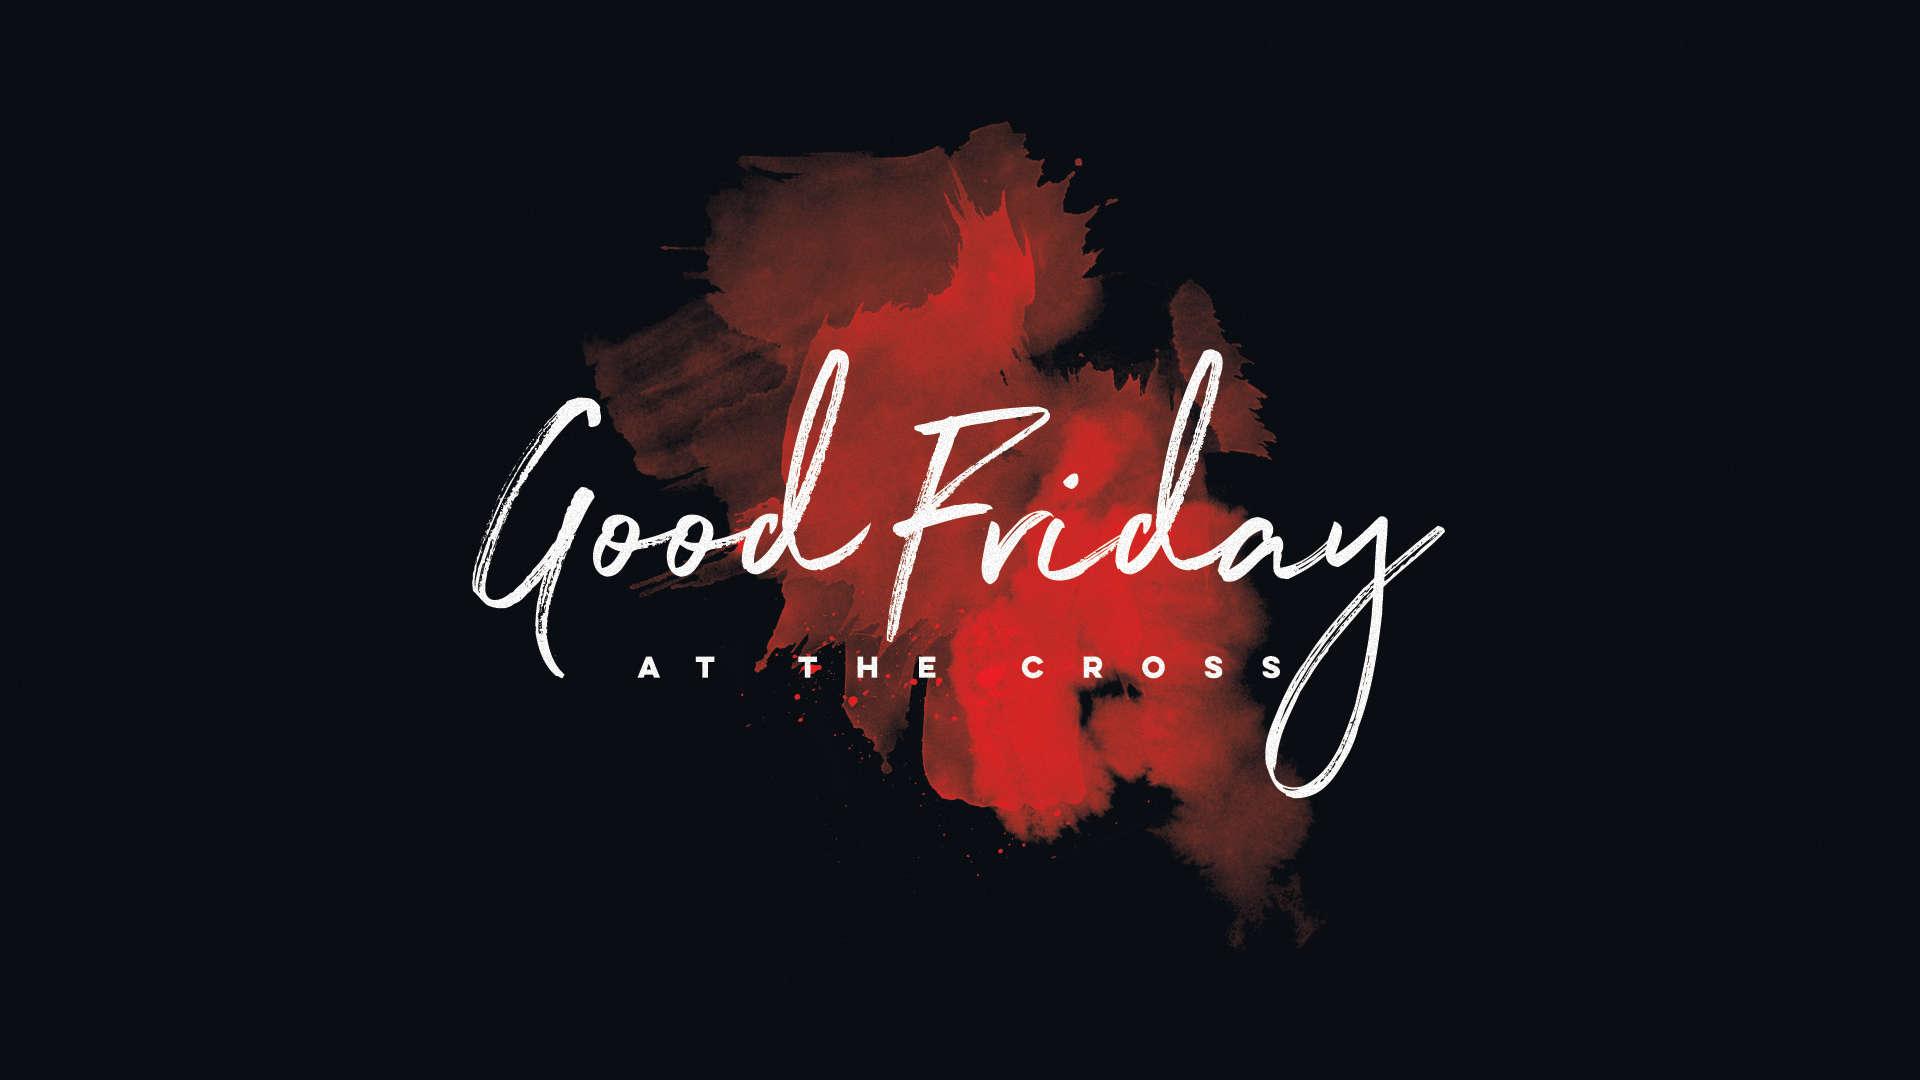 Good Friday 2018 HD Wallpaper and Image Download Free